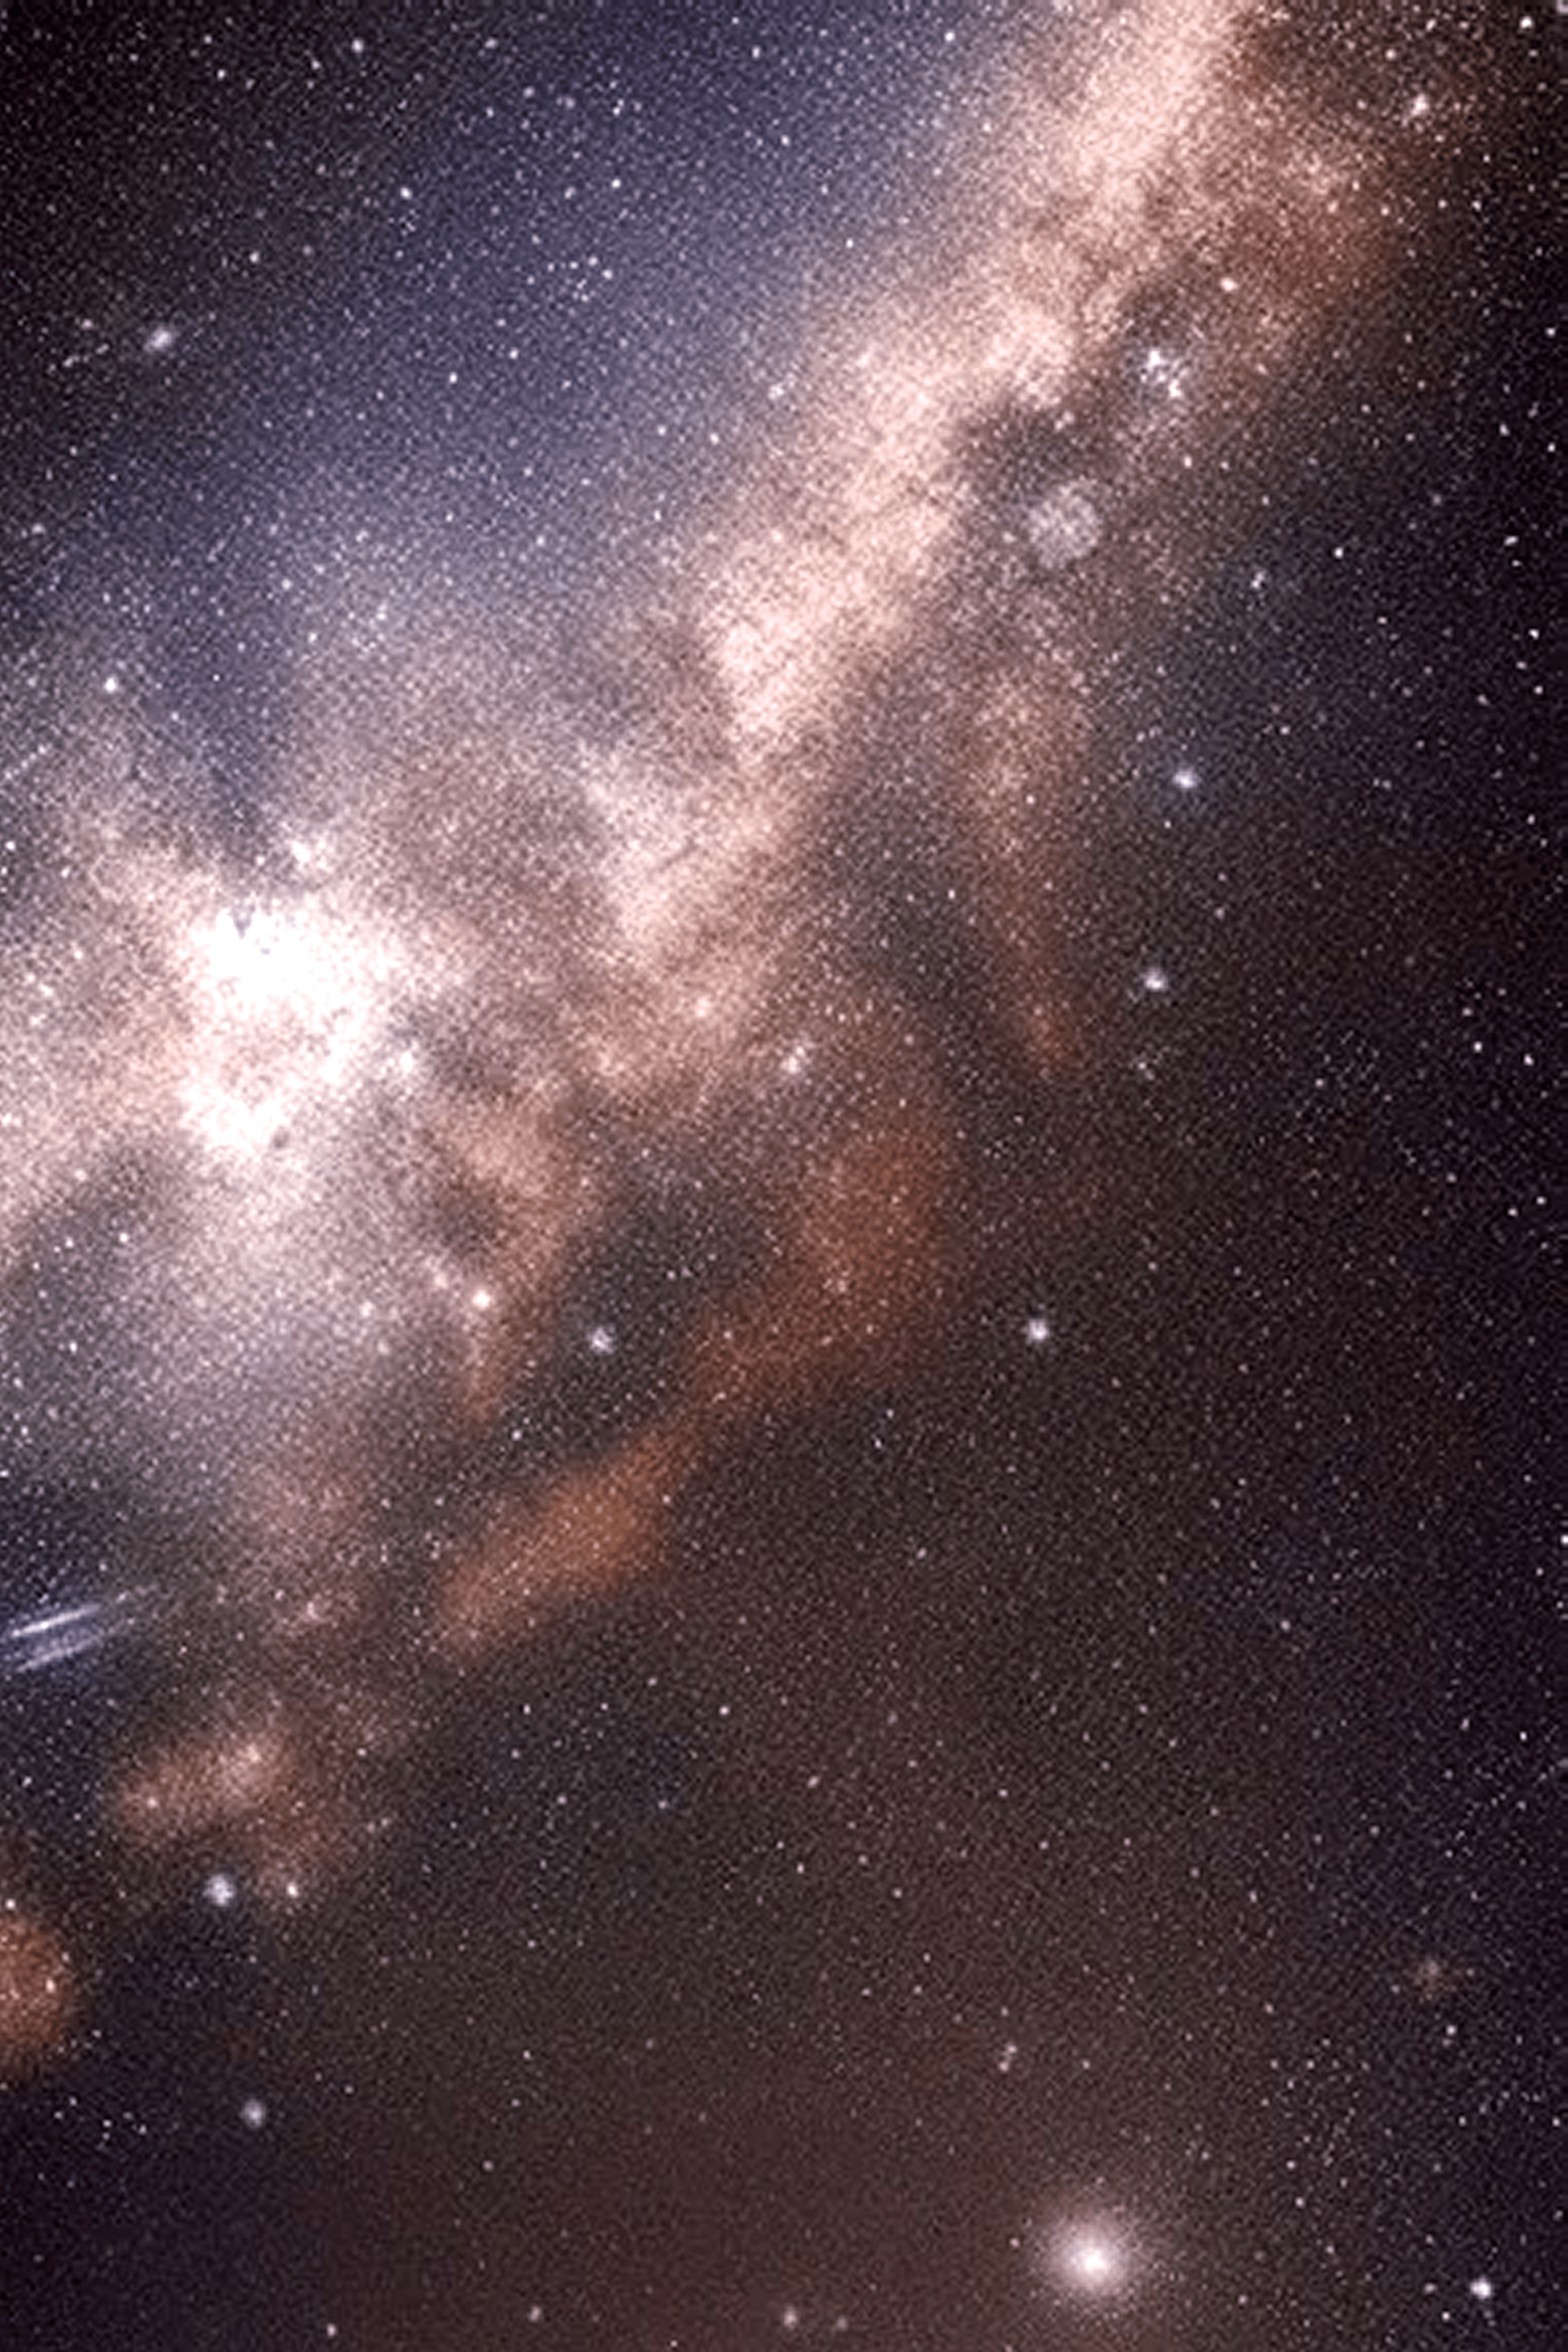 Milky Way Dimmed AI Space Art created by Sollog